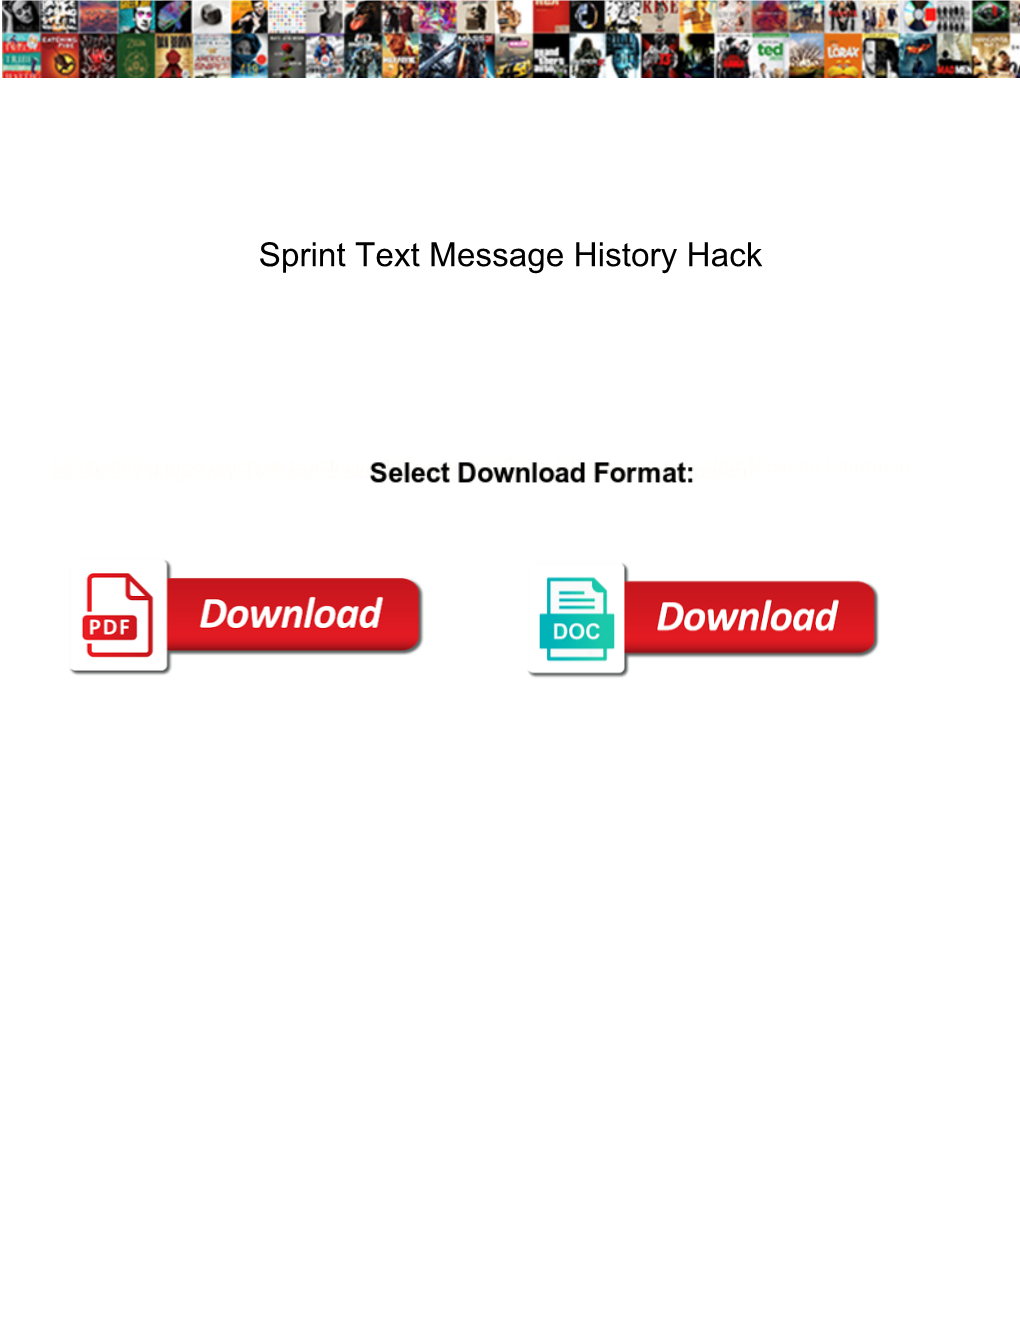 Sprint Text Message History Hack